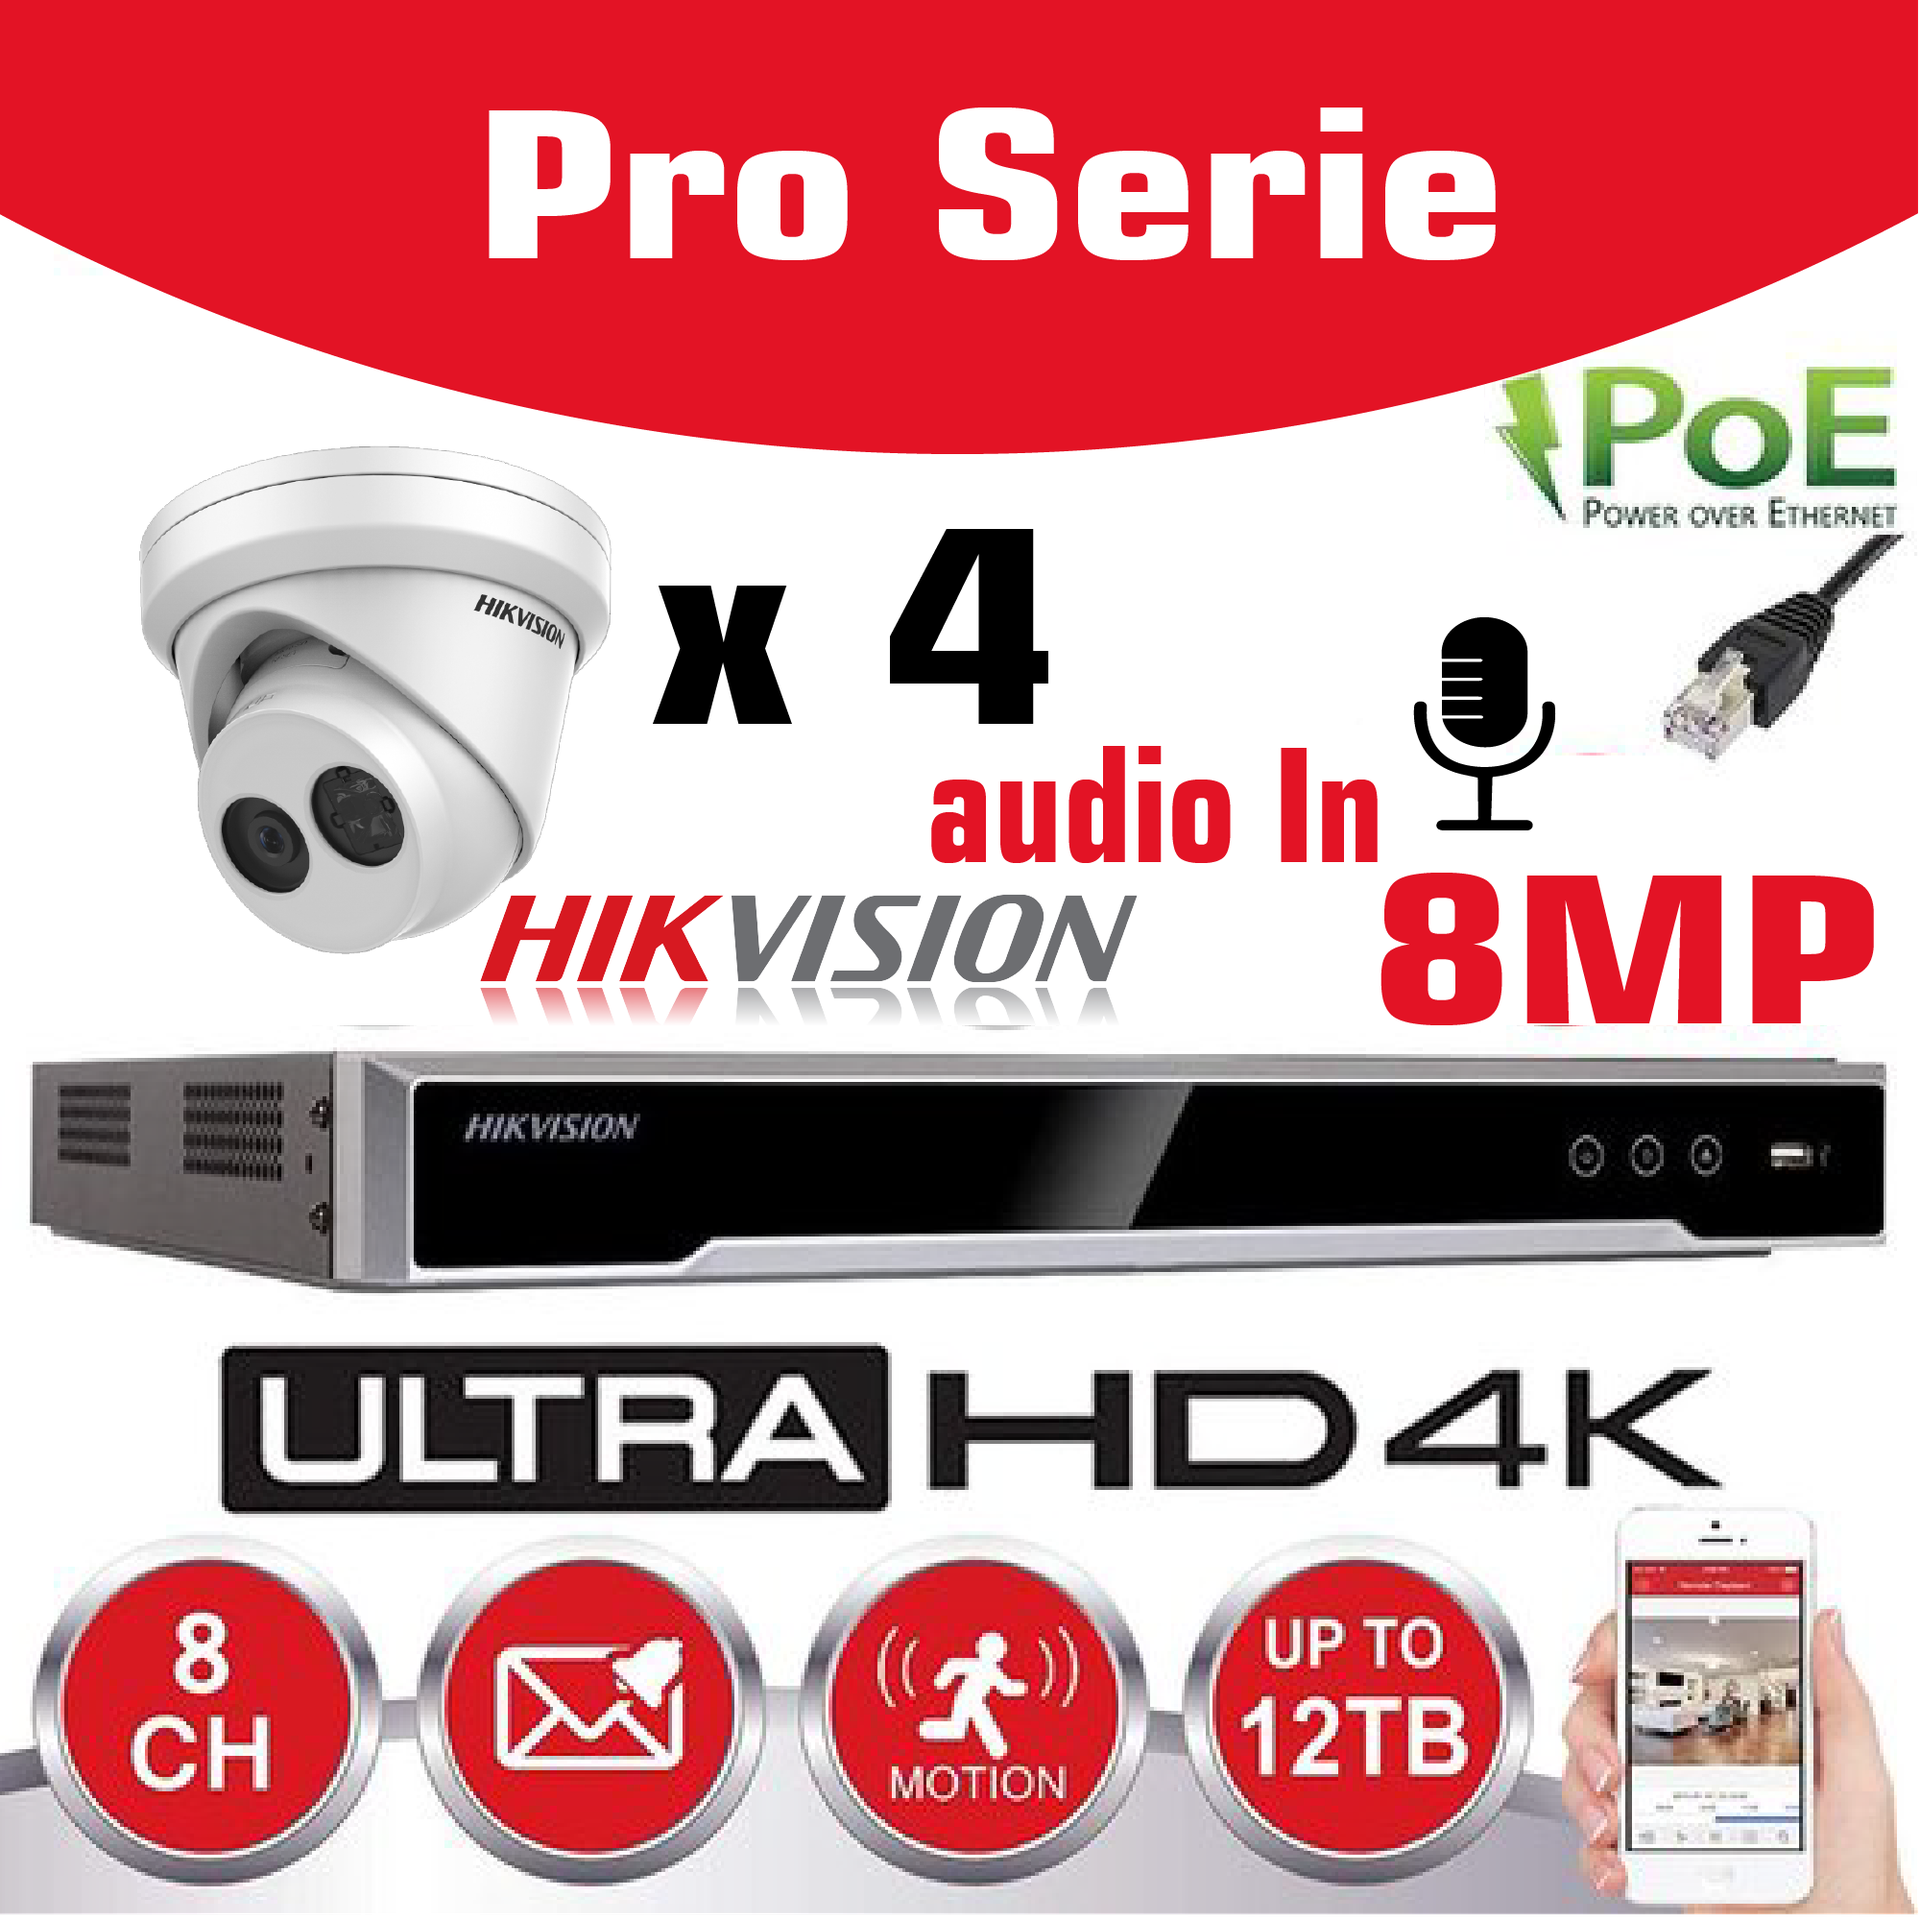 [HIKPRO-8M4T] HIKVISION 8MP Surveillance Camera Kit  Pro Serie - NVR 8Ch  4K UHD IP POE - 4x 8MP IP TURRET CAMERA Pro-Serie In/Outdoor Night Vision IR Up to 30m - 2TB HDD Storage 